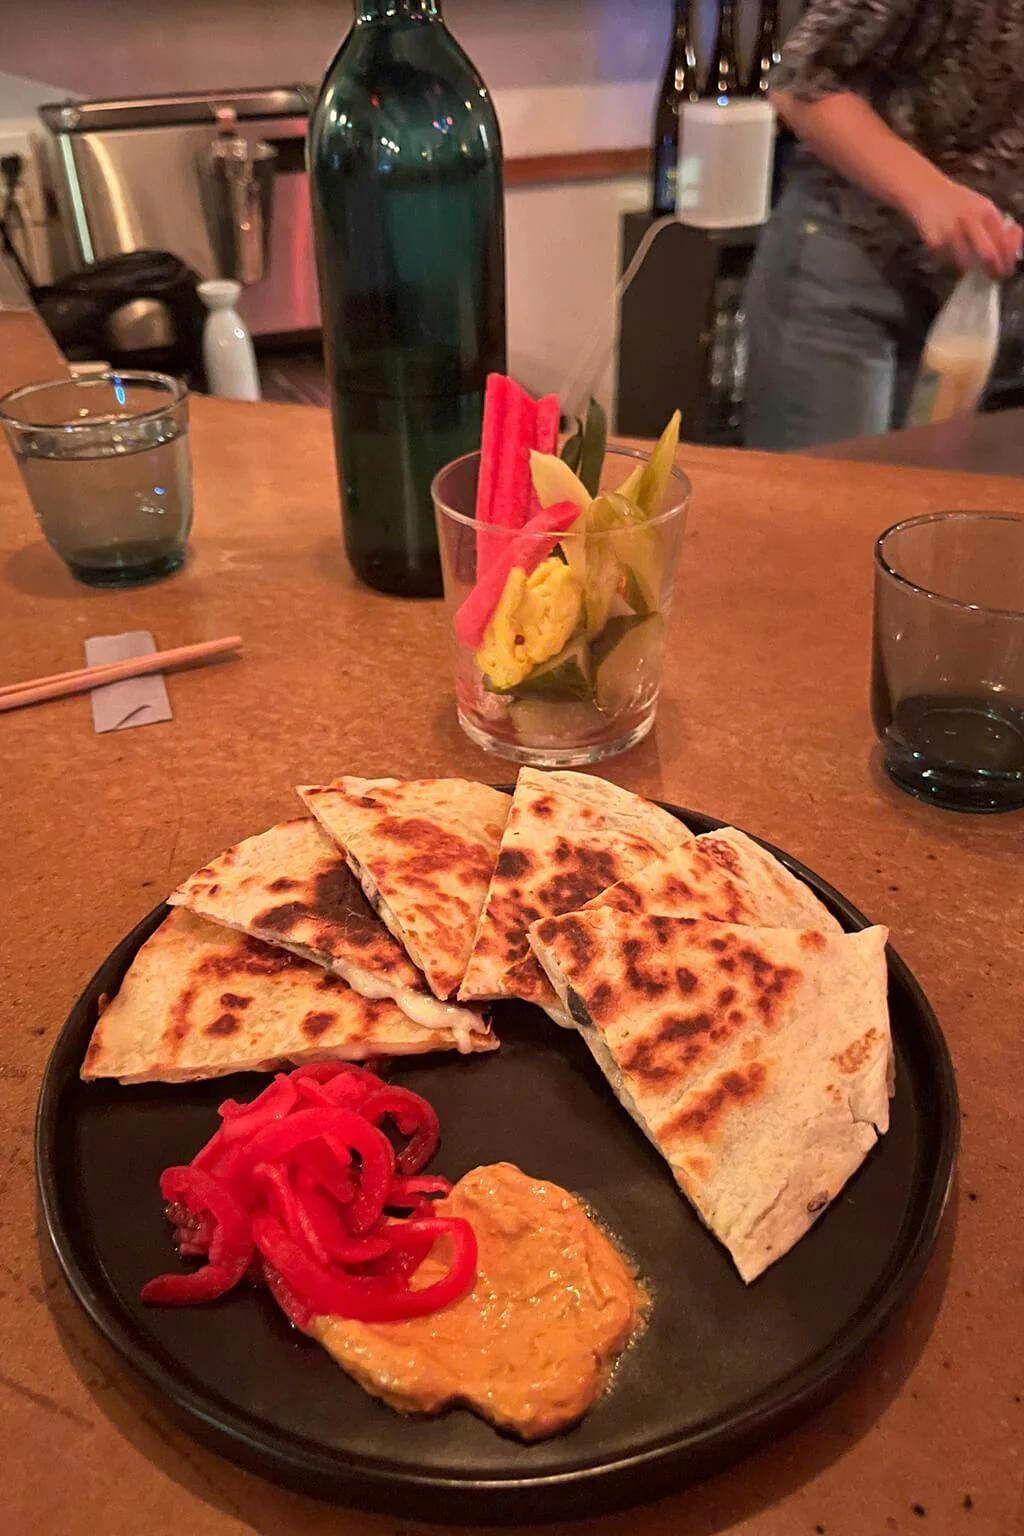 The huitlacoche quesadilla is made with mozzarella cheese and nori, served with pickled red onions and spicy mayo. | Photo by Taylor Markarian.